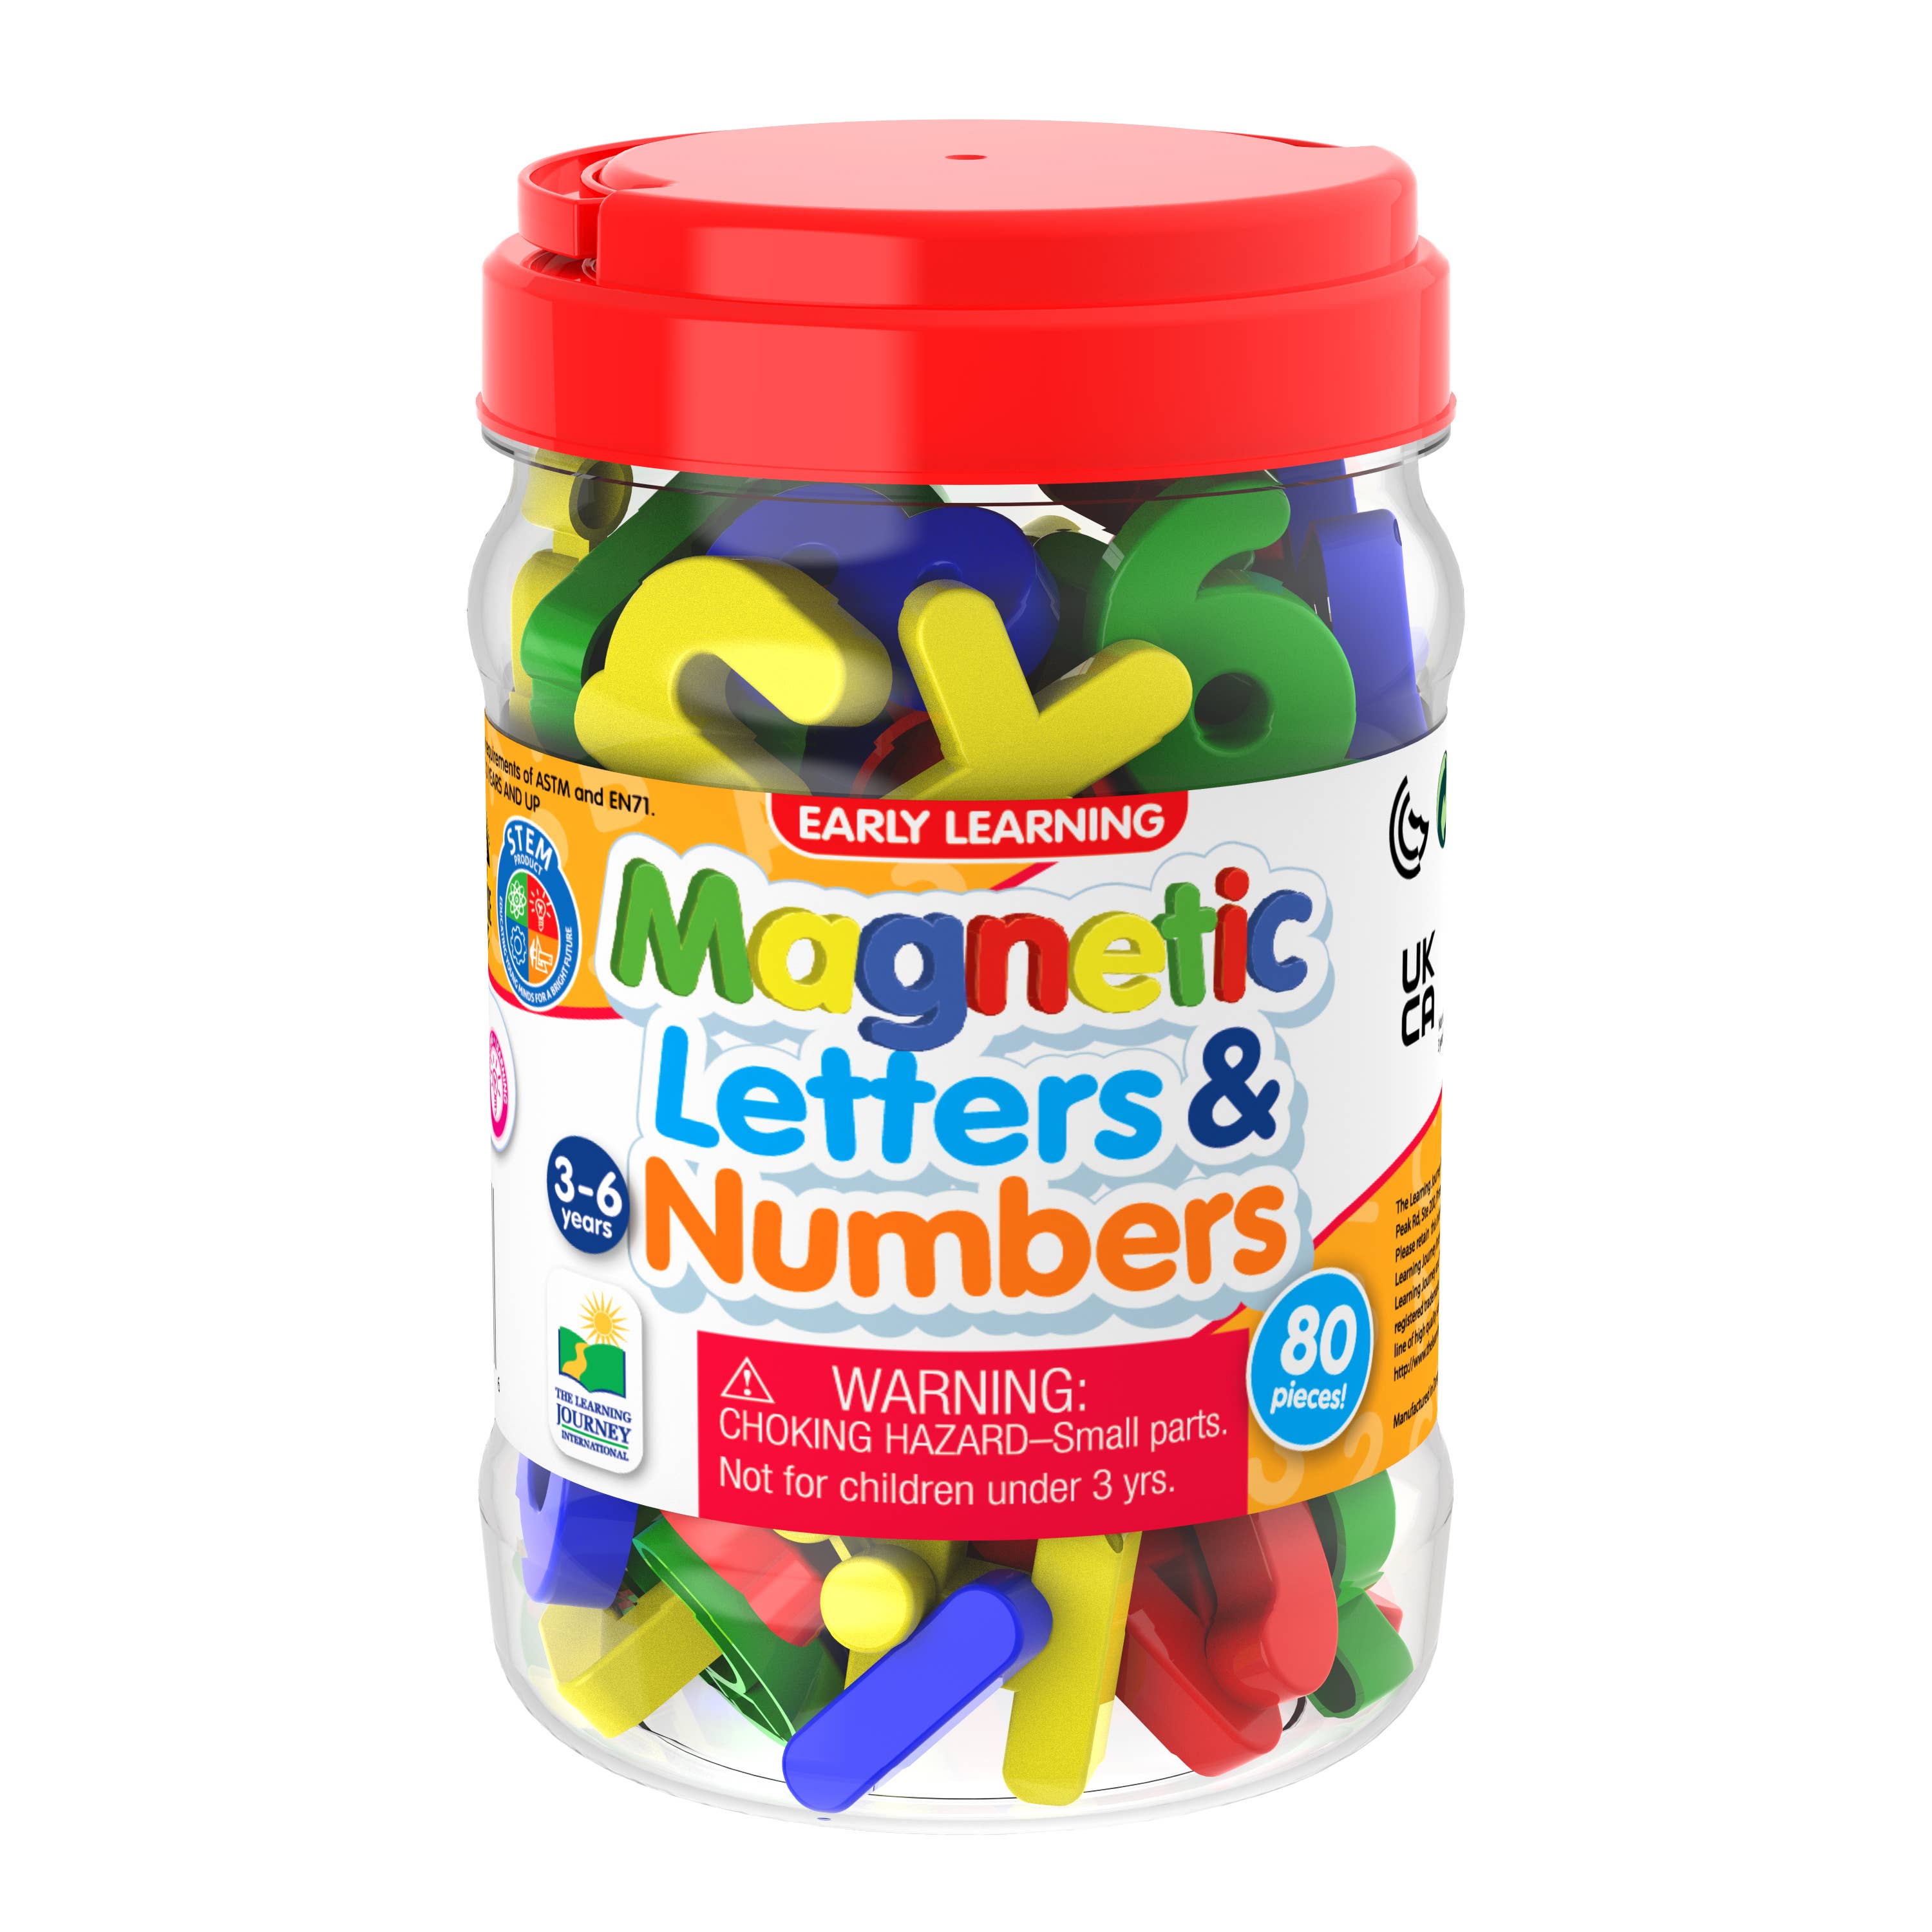 Magnetic Letters & Numbers, The Magnetic Letters & Numbers set is designed to make learning the alphabet and numbers a fun and interactive experience for your little ones. This jug full of letters and numbers offers endless possibilities for learning and creative play. Magnetic Letters & Numbers Features: Alphabet and Number Mastery: This set is a fantastic resource for helping young learners master their alphabet and number skills. It provides both upper and lower-case alphabet letters, including two sets 